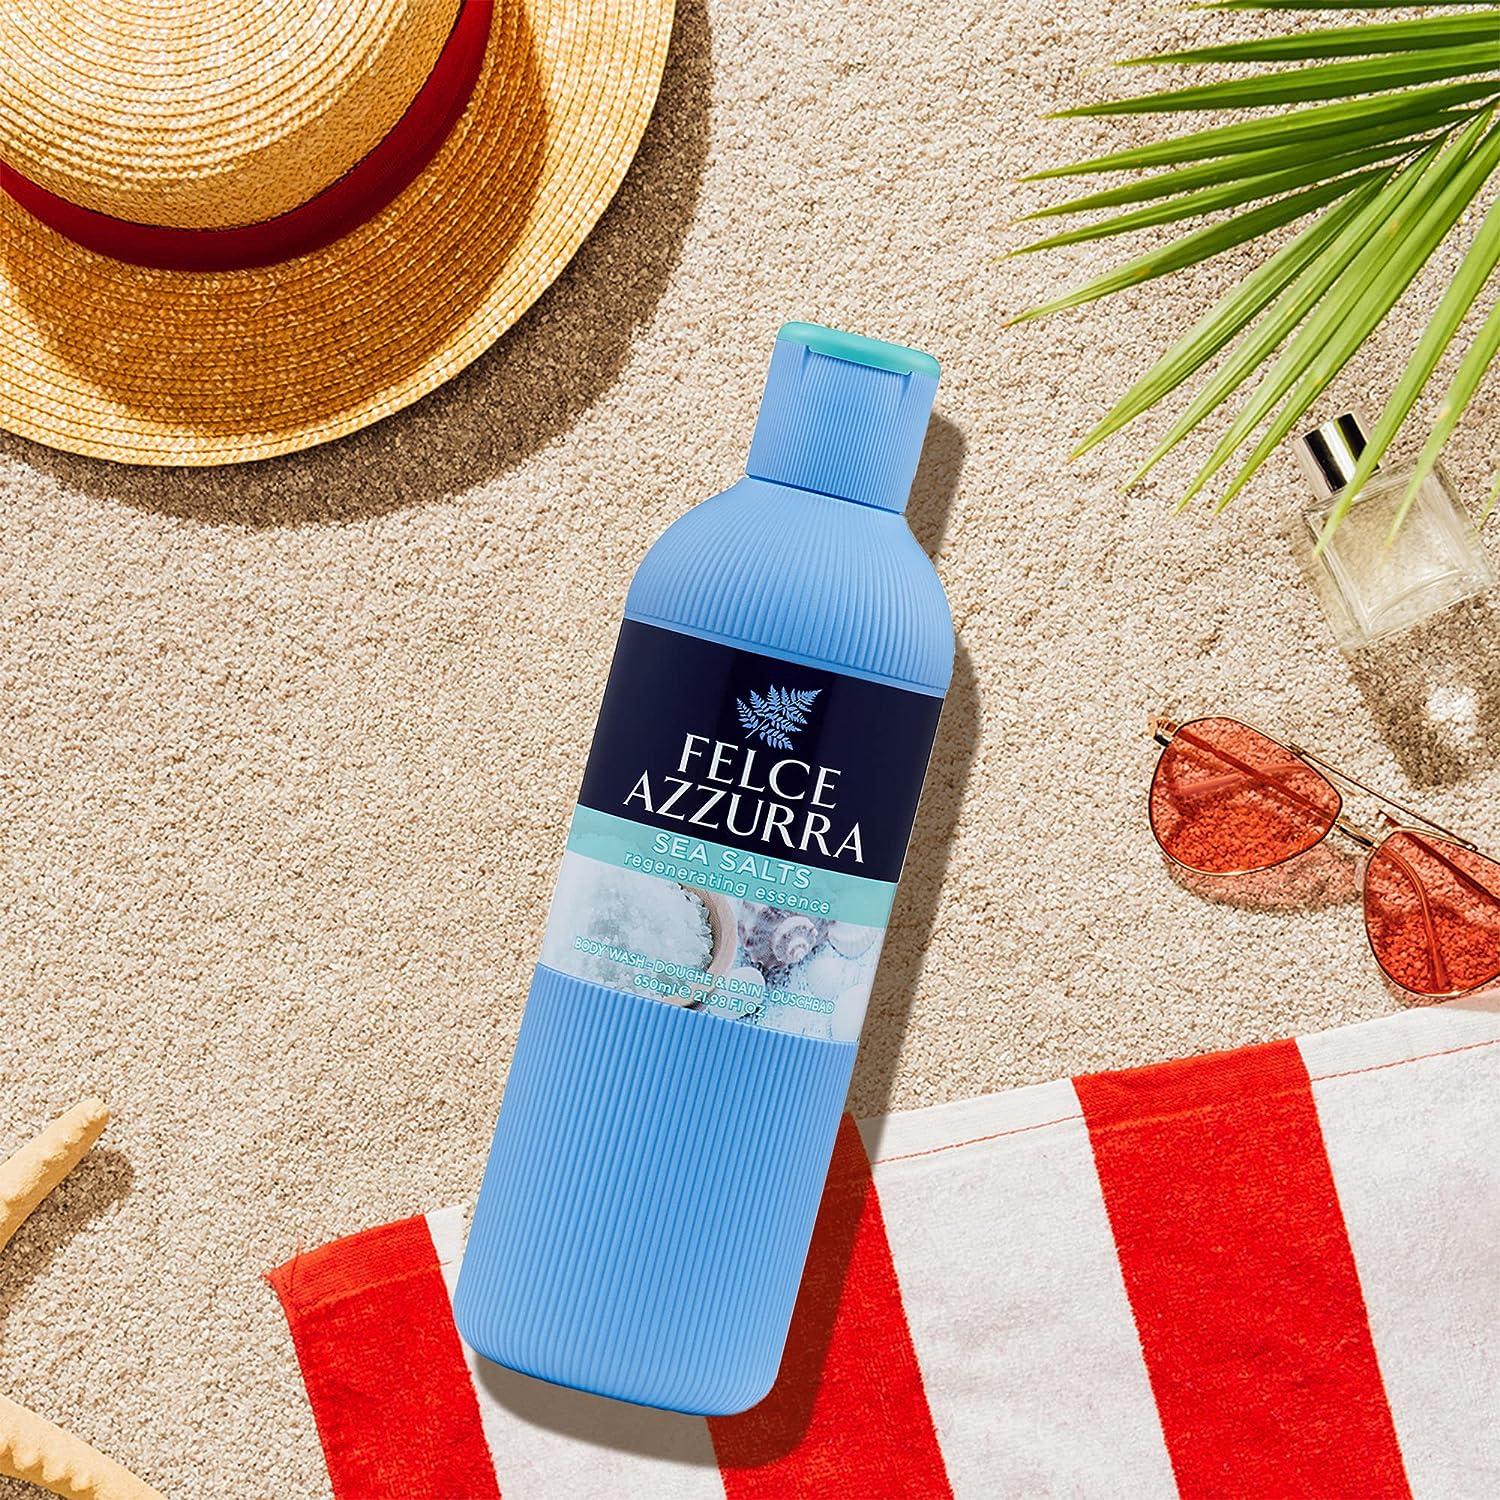 Felce Azzurra Sea Salt - Regenerating Essence Body Wash - New Rich And  Velvety Formula - Envelops Your Skin With A Gentle And Light Lather -  Features Notes Of White Tea And Marine - 22 Oz